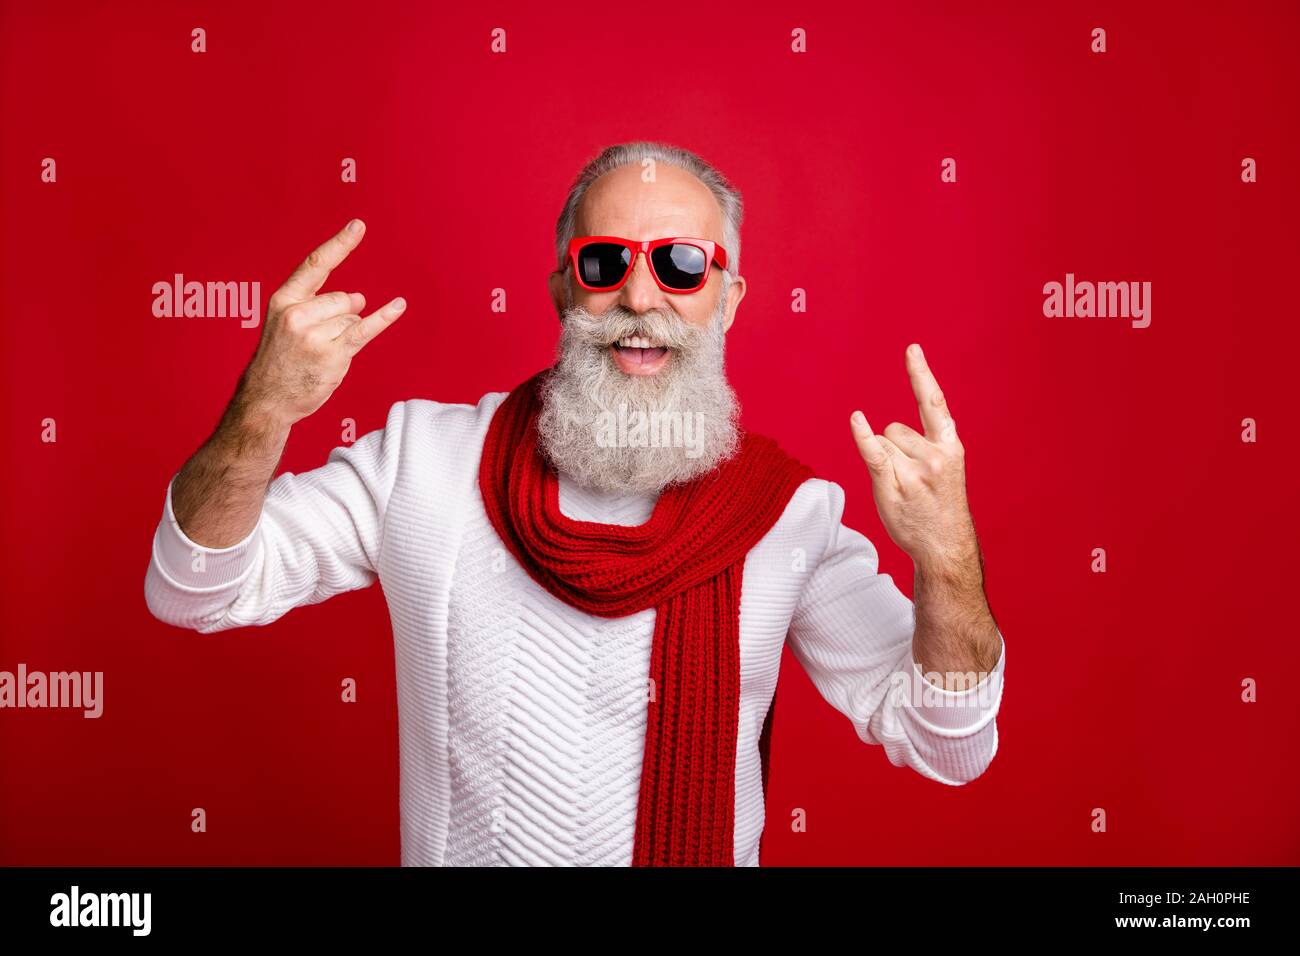 Modern Santa Character Aged Man Showing Horns Heavy Metal Fan Wear Sun Specs Knitted Clothes Isolated Red Background Stock Photo Alamy